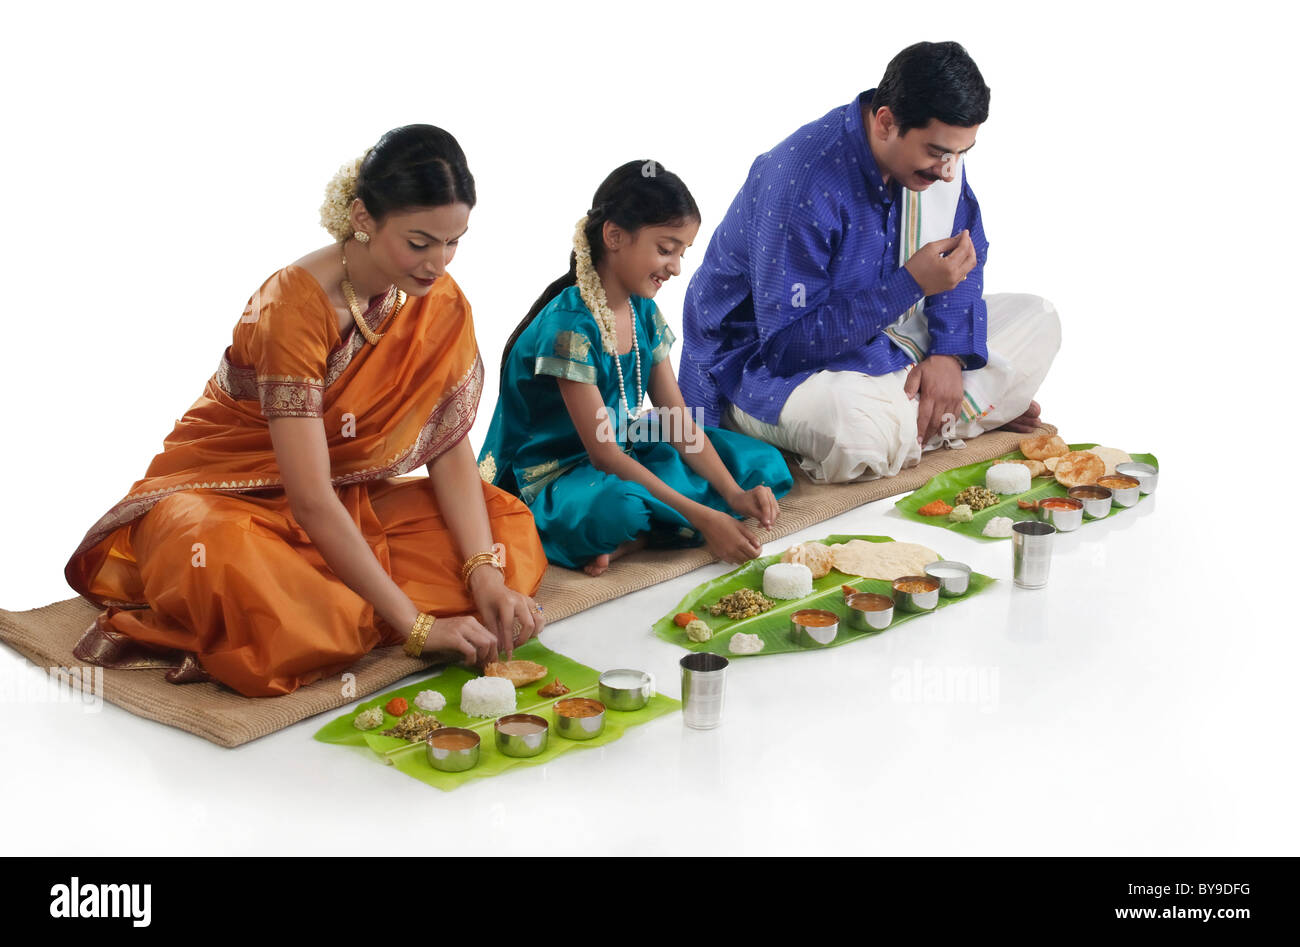 South Indian family having lunch Stock Photo - Alamy